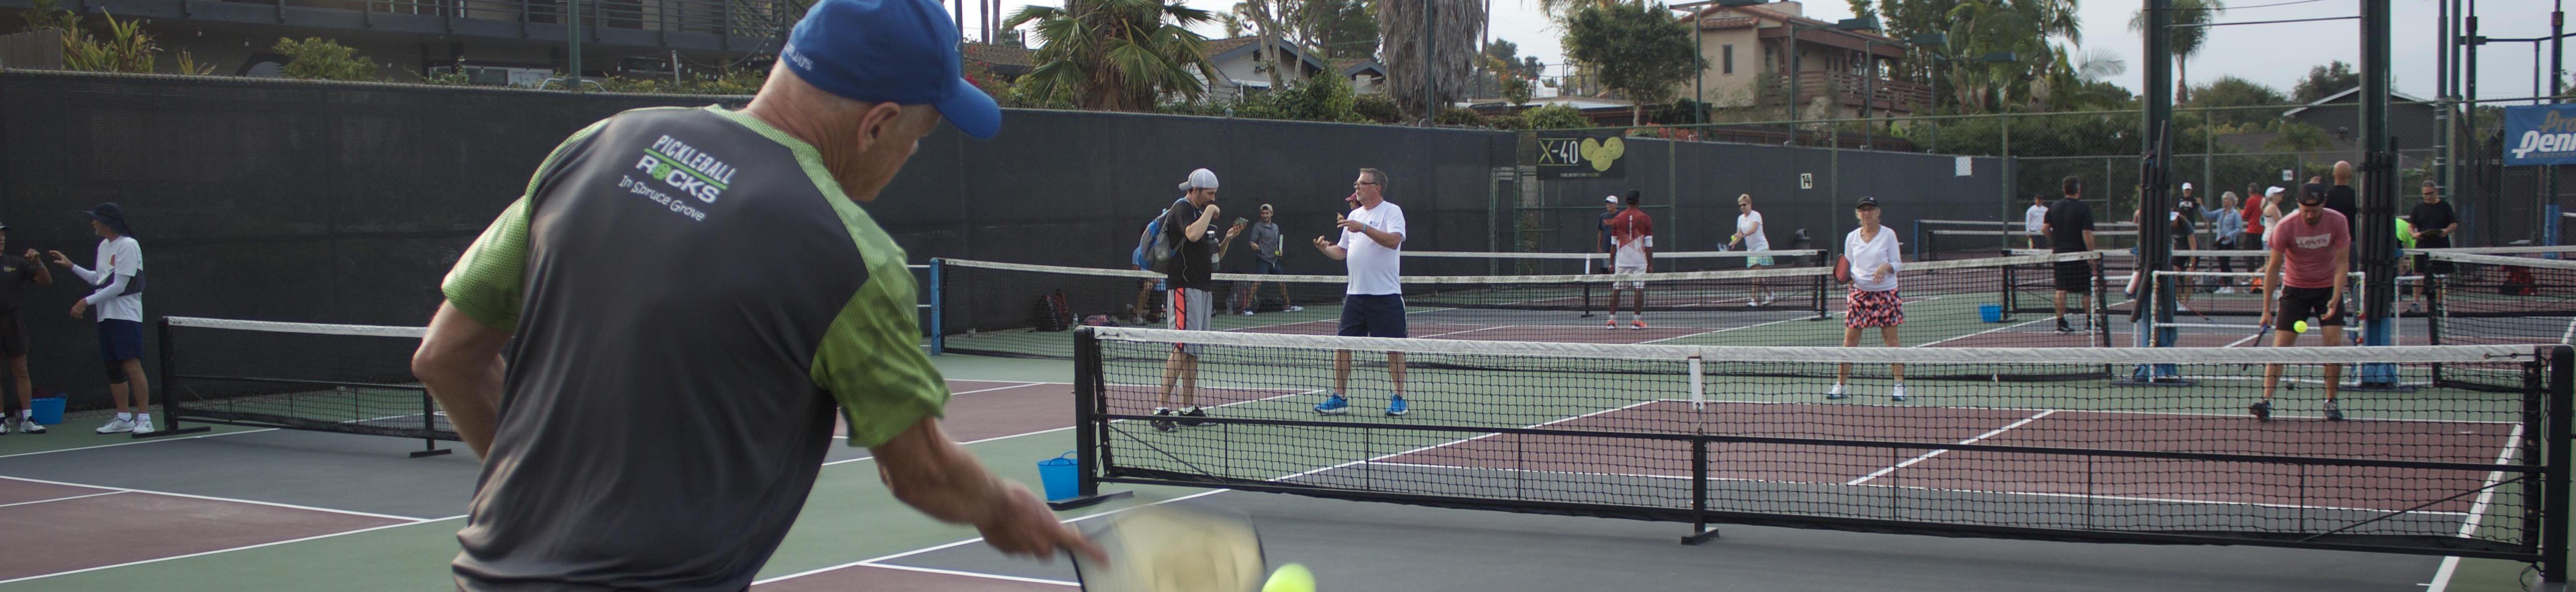 View of pickleball courts. Man wearing gray shirt is returning a serve. Two people are on the other end of the court also warming up. There are some people standing around in the background on various courts either chatting or warming up.